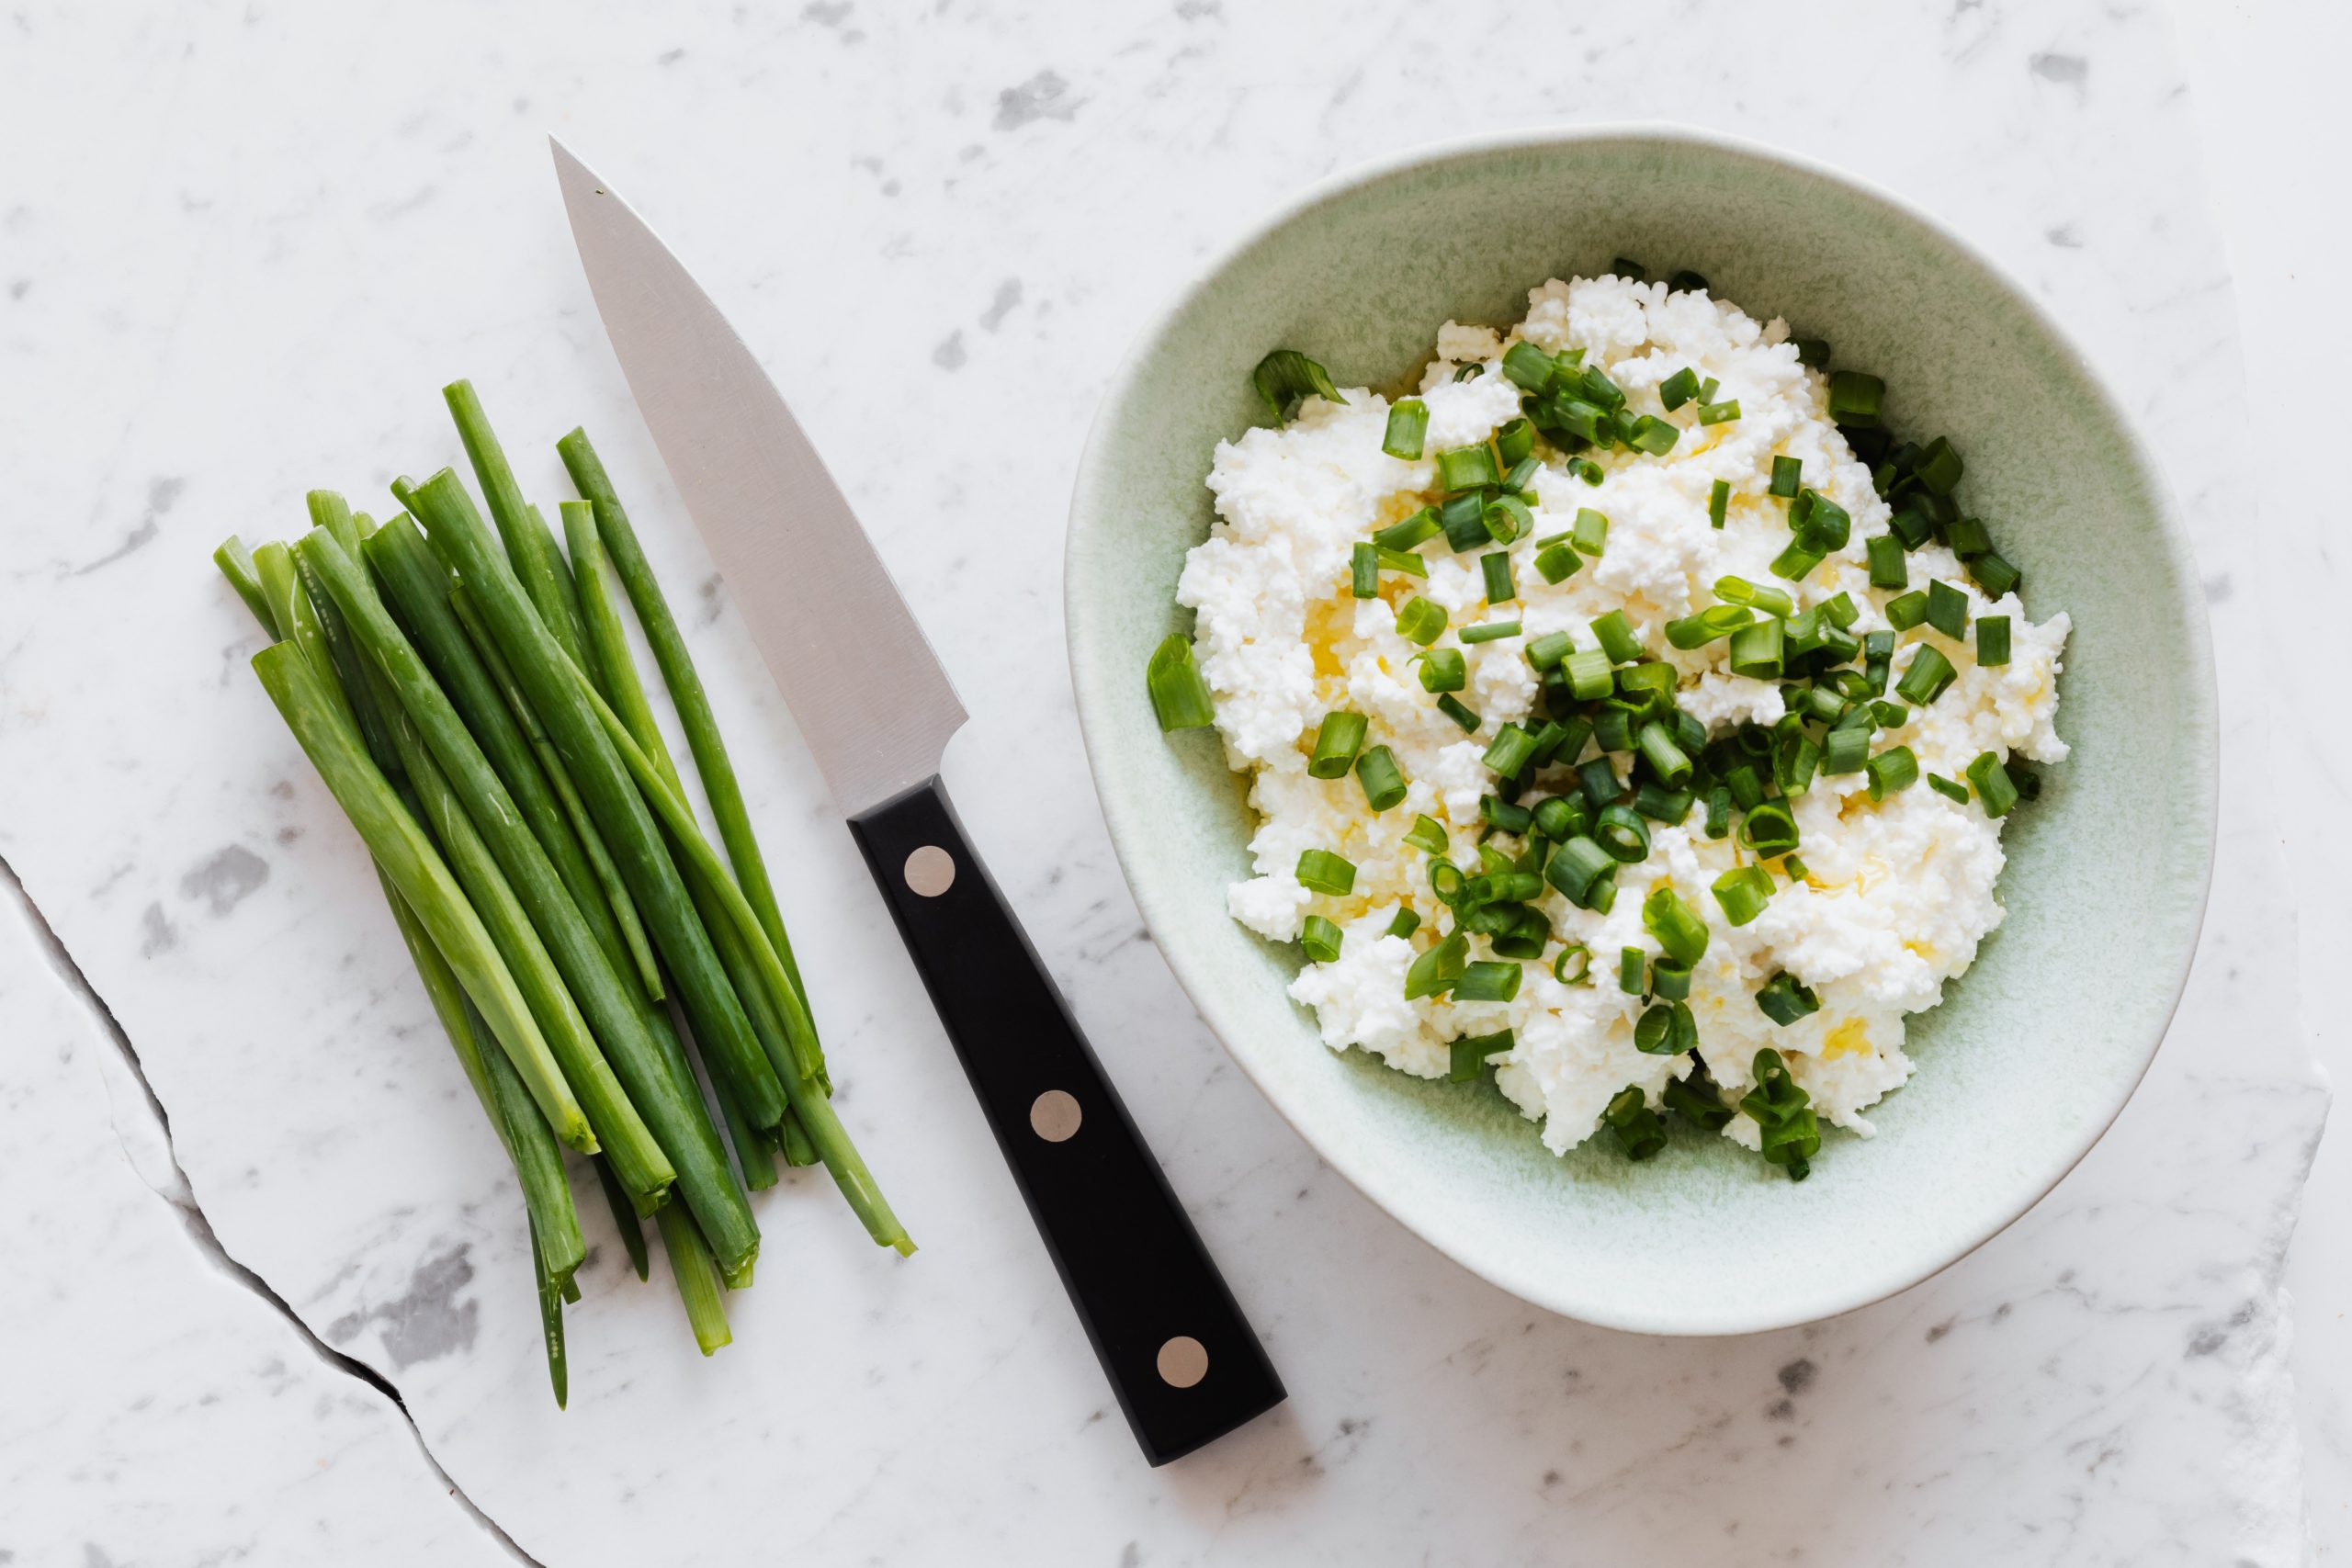 Cottage cheese in a bowl with chives. Cottage cheese contains the mineral selenium.